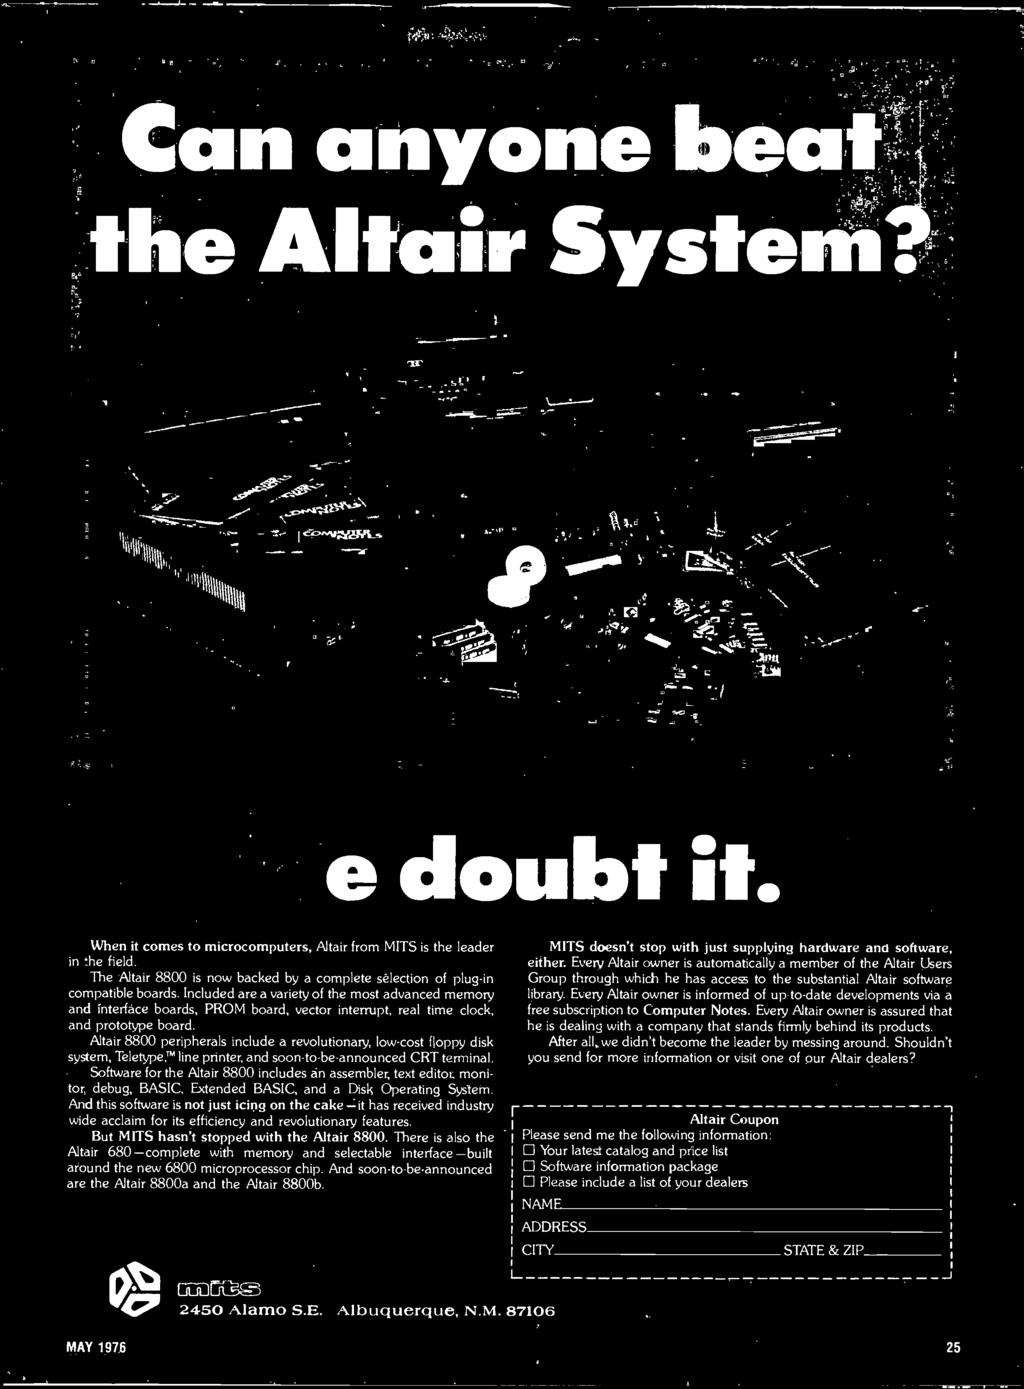 Software for the Altair 8800 includes an assembler, text editor, monitor, debug, BASIC, Extended BASIC, and a Disk Operating System.